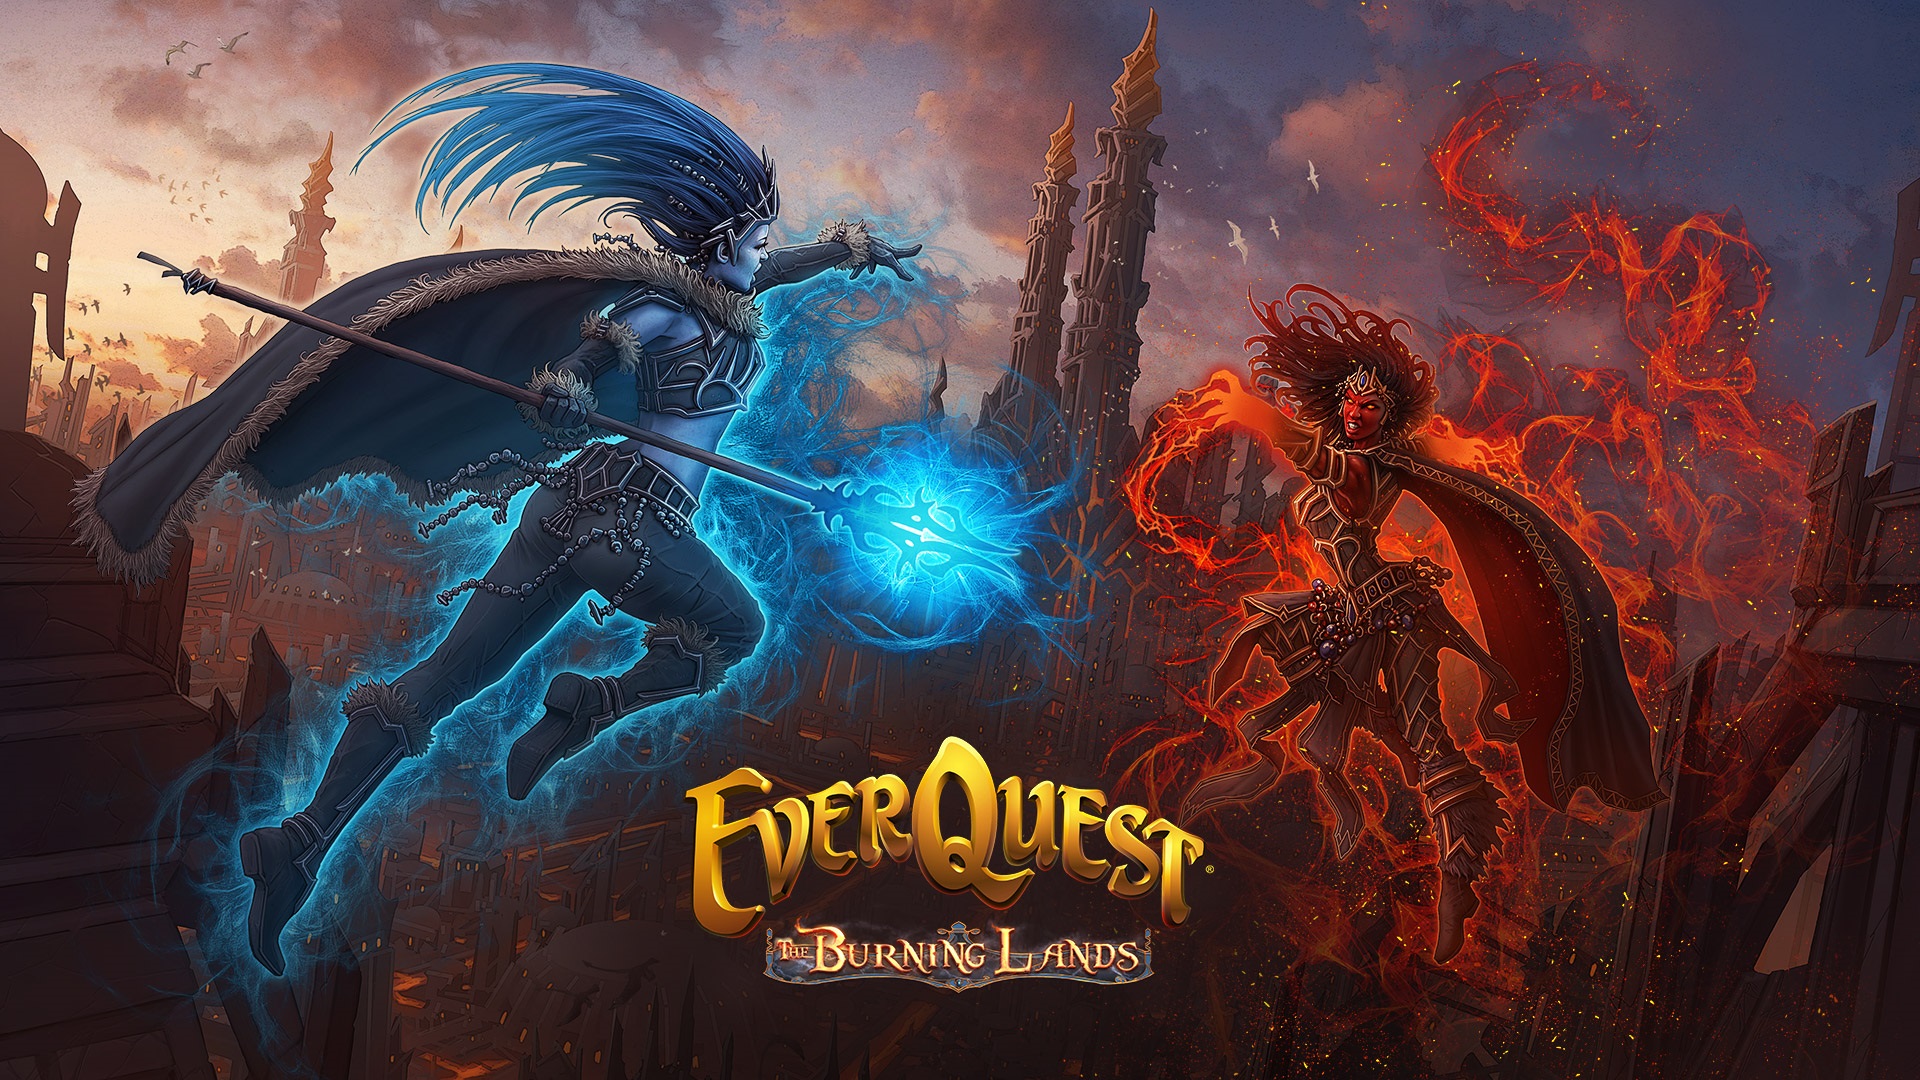 Lord of everquest steam фото 3